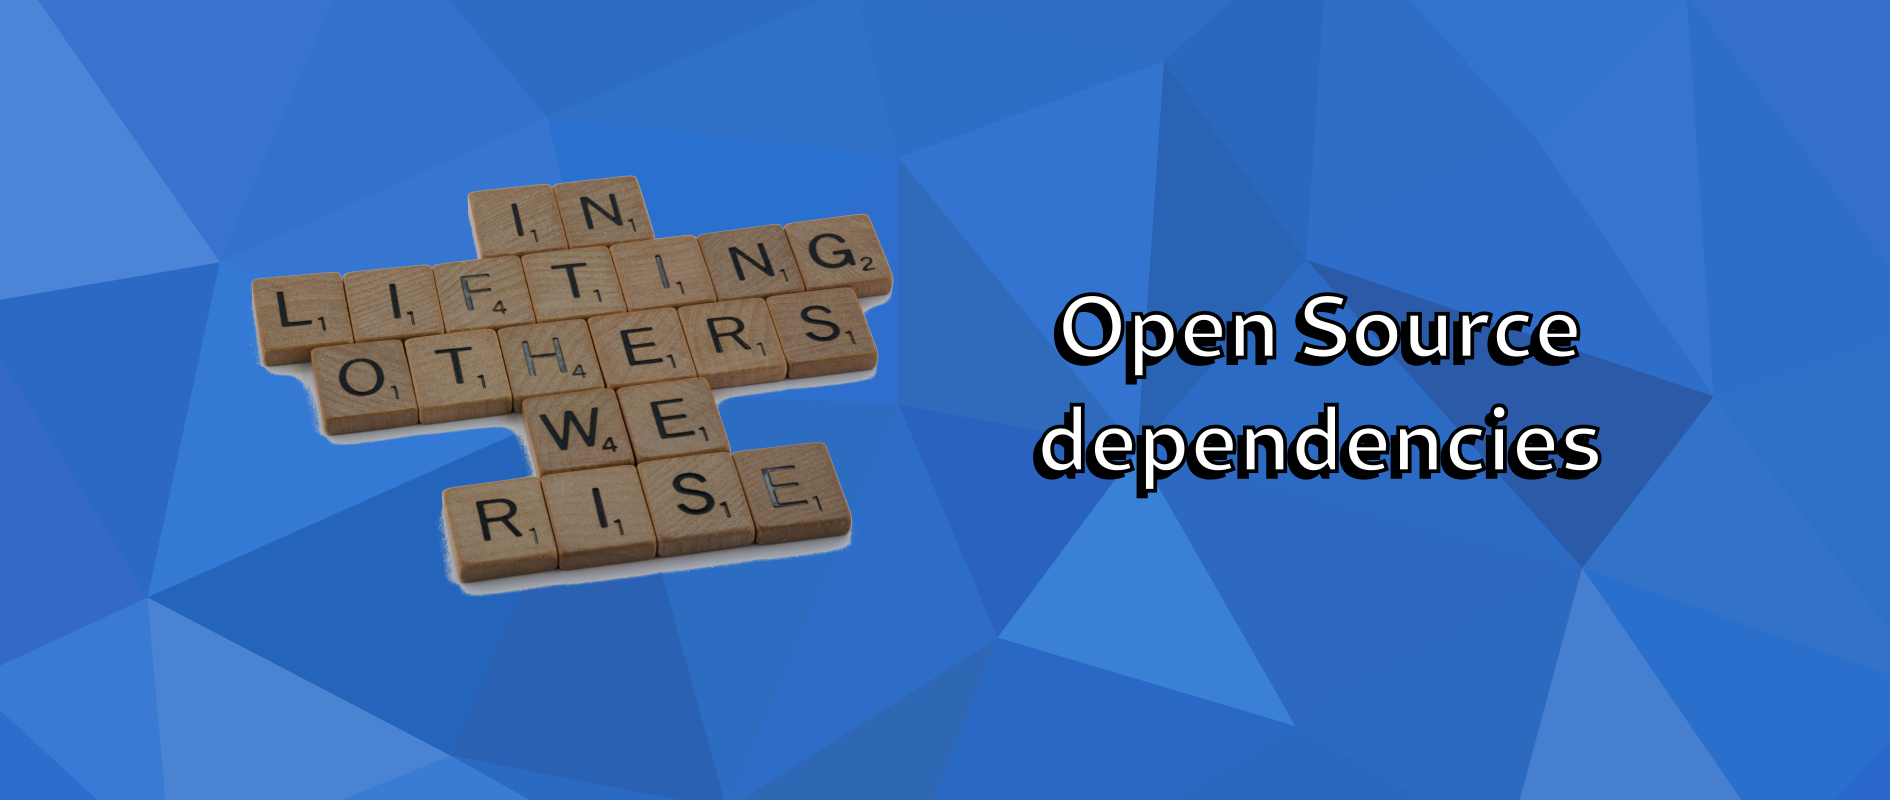 "Open Source Dependencies" is written in big text against a blue background. Next to the next are tiles from the board game Scrabble, together writing: "In lifting others we rise."